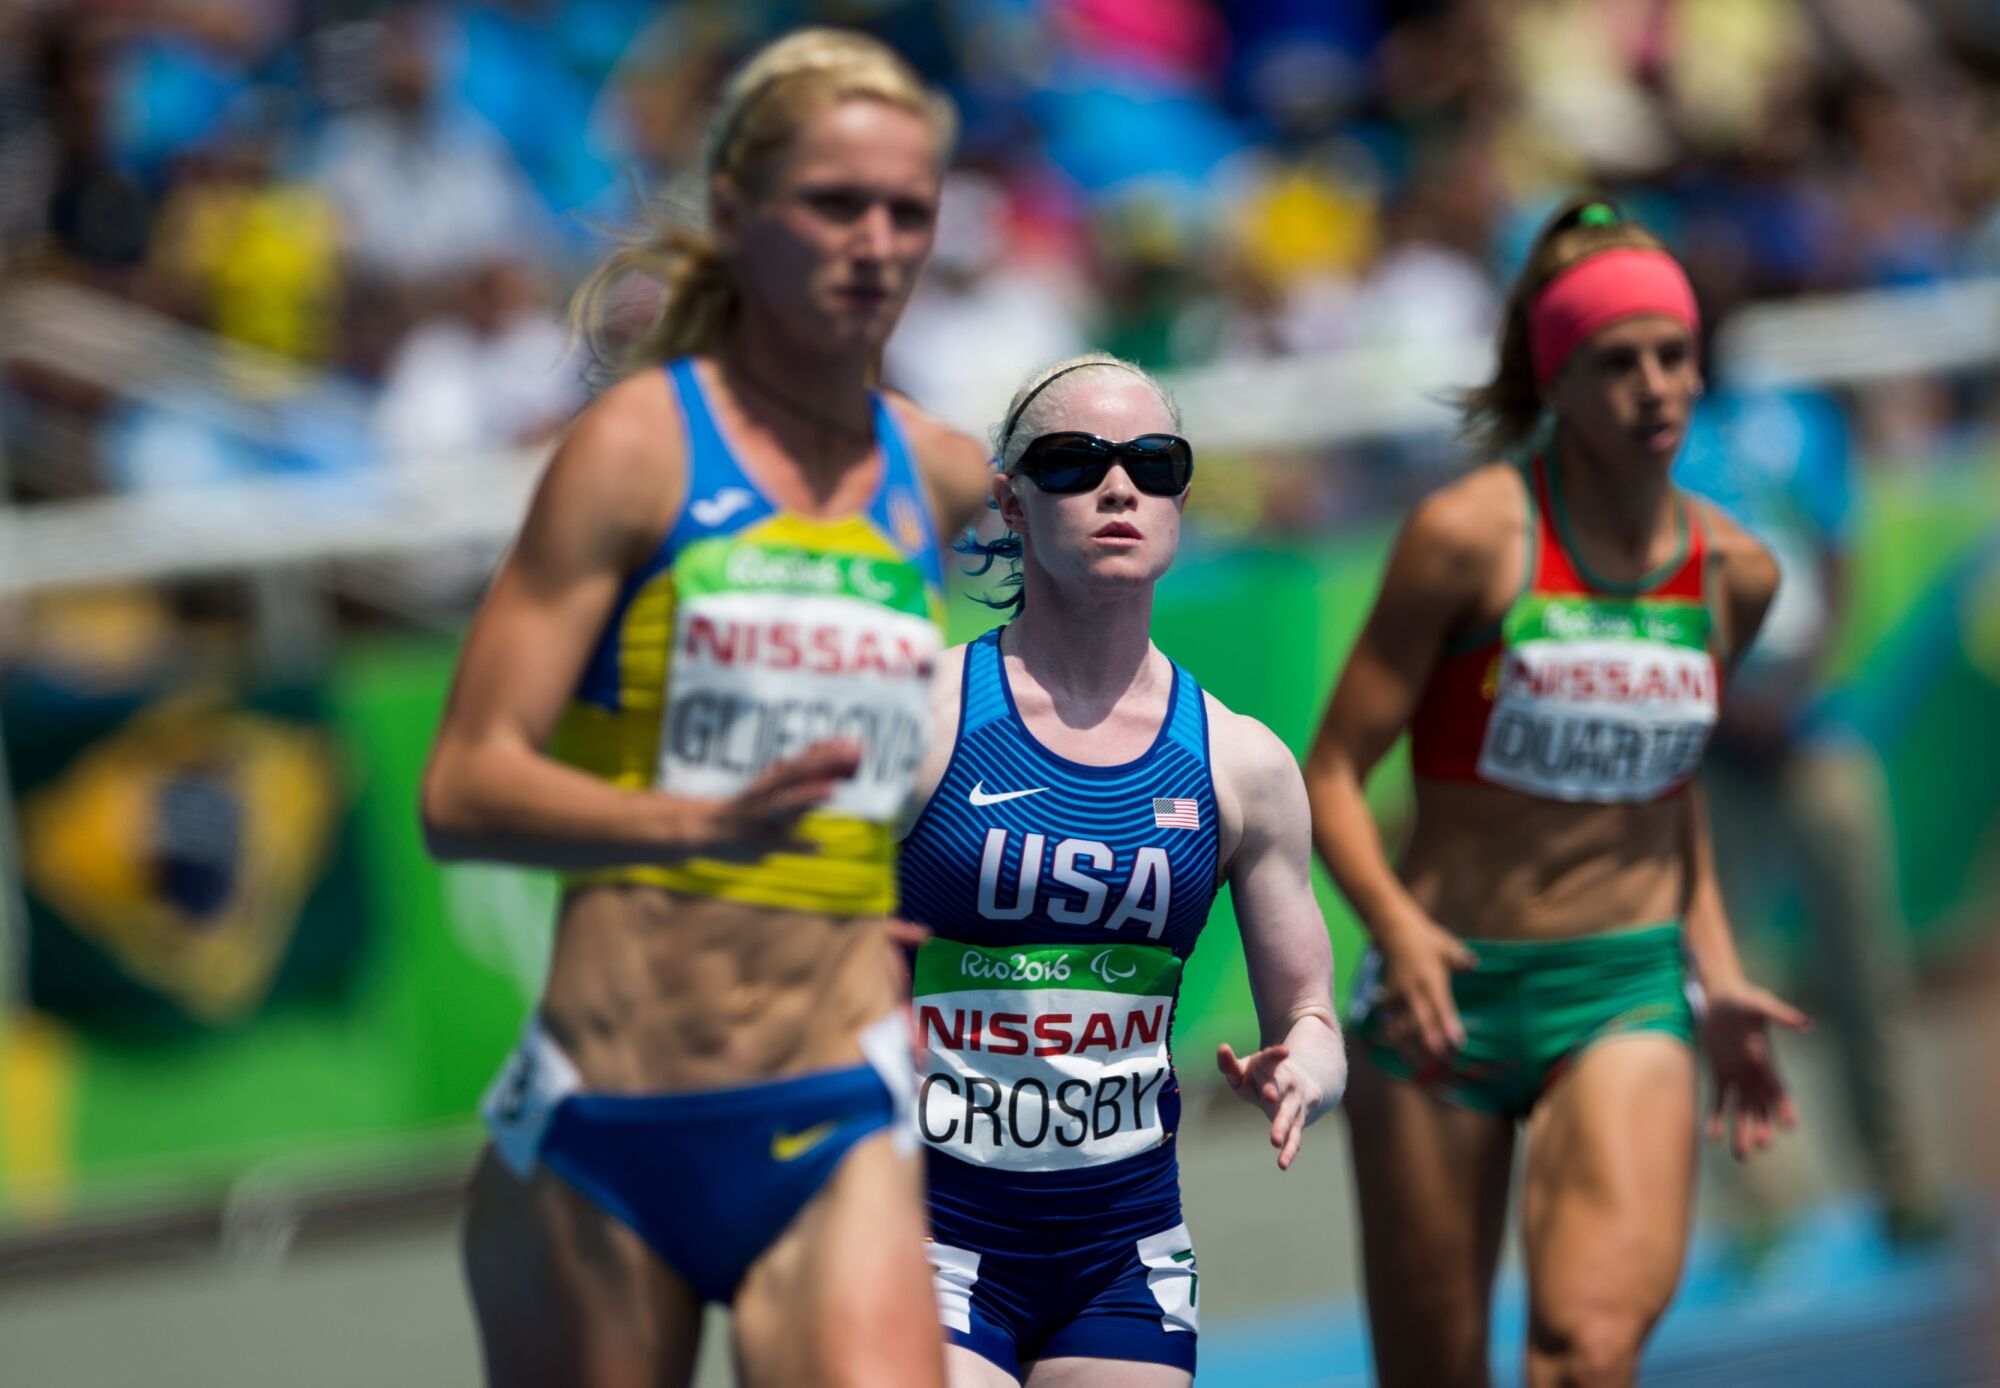 U.S. runner Kym Crosby runs between two other athletes at the 2016 Paralympics in Rio de Janeiro, Brazil.